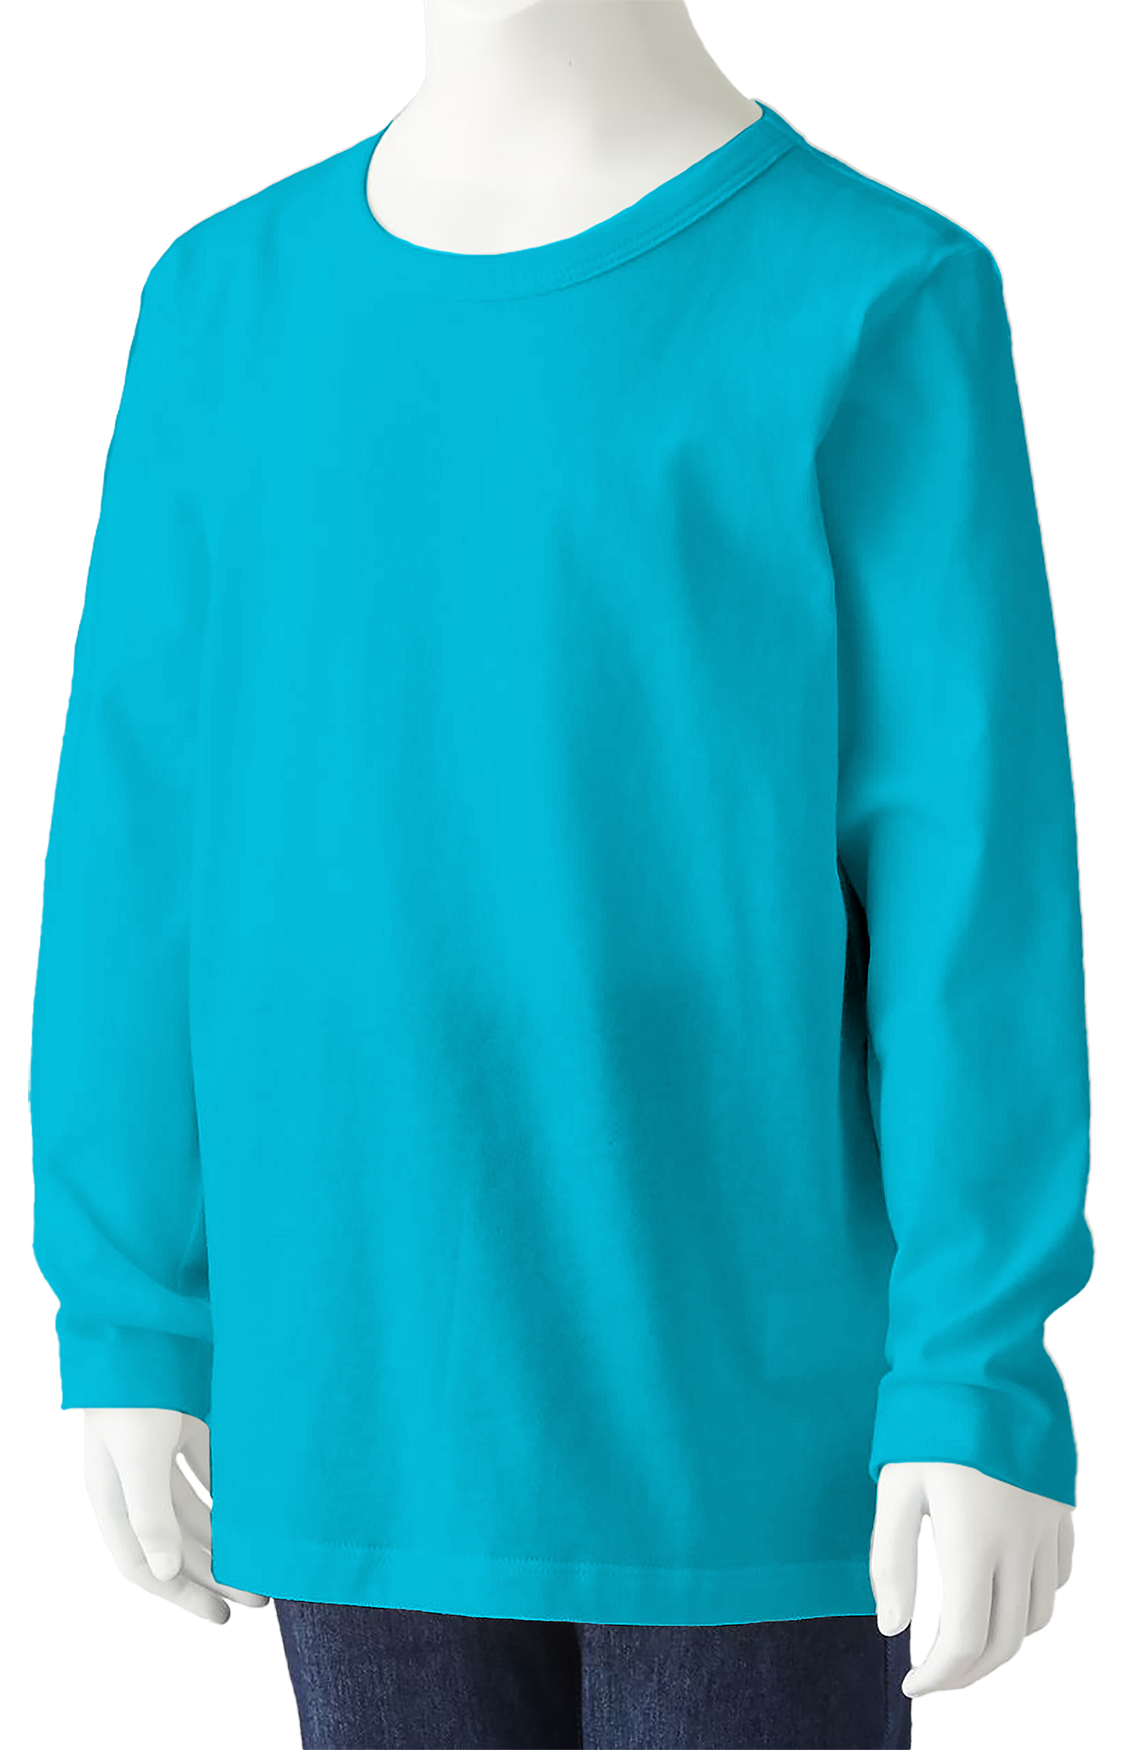 100% Cotton Long Sleeve Round Neck Kids-Turquoise (Age 1-2) - Panbasic